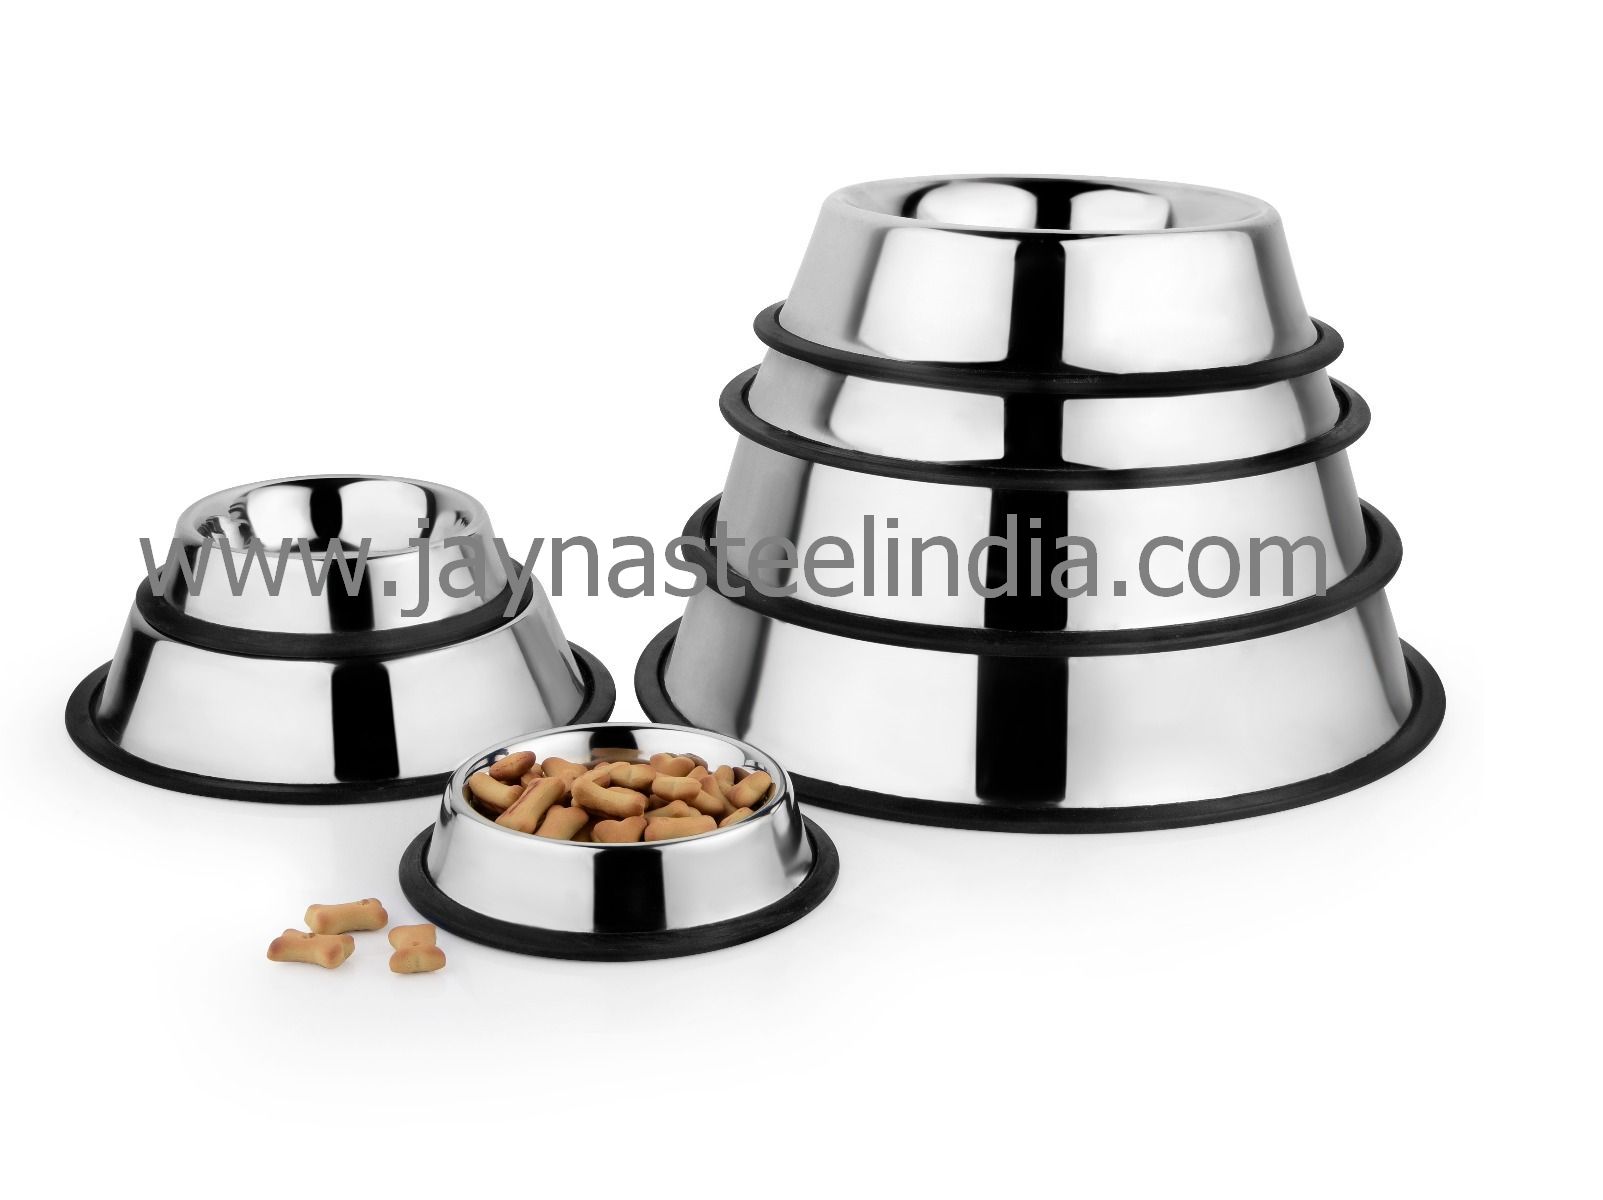 Stainless steel anti skid non tip dog bowl with rubber base